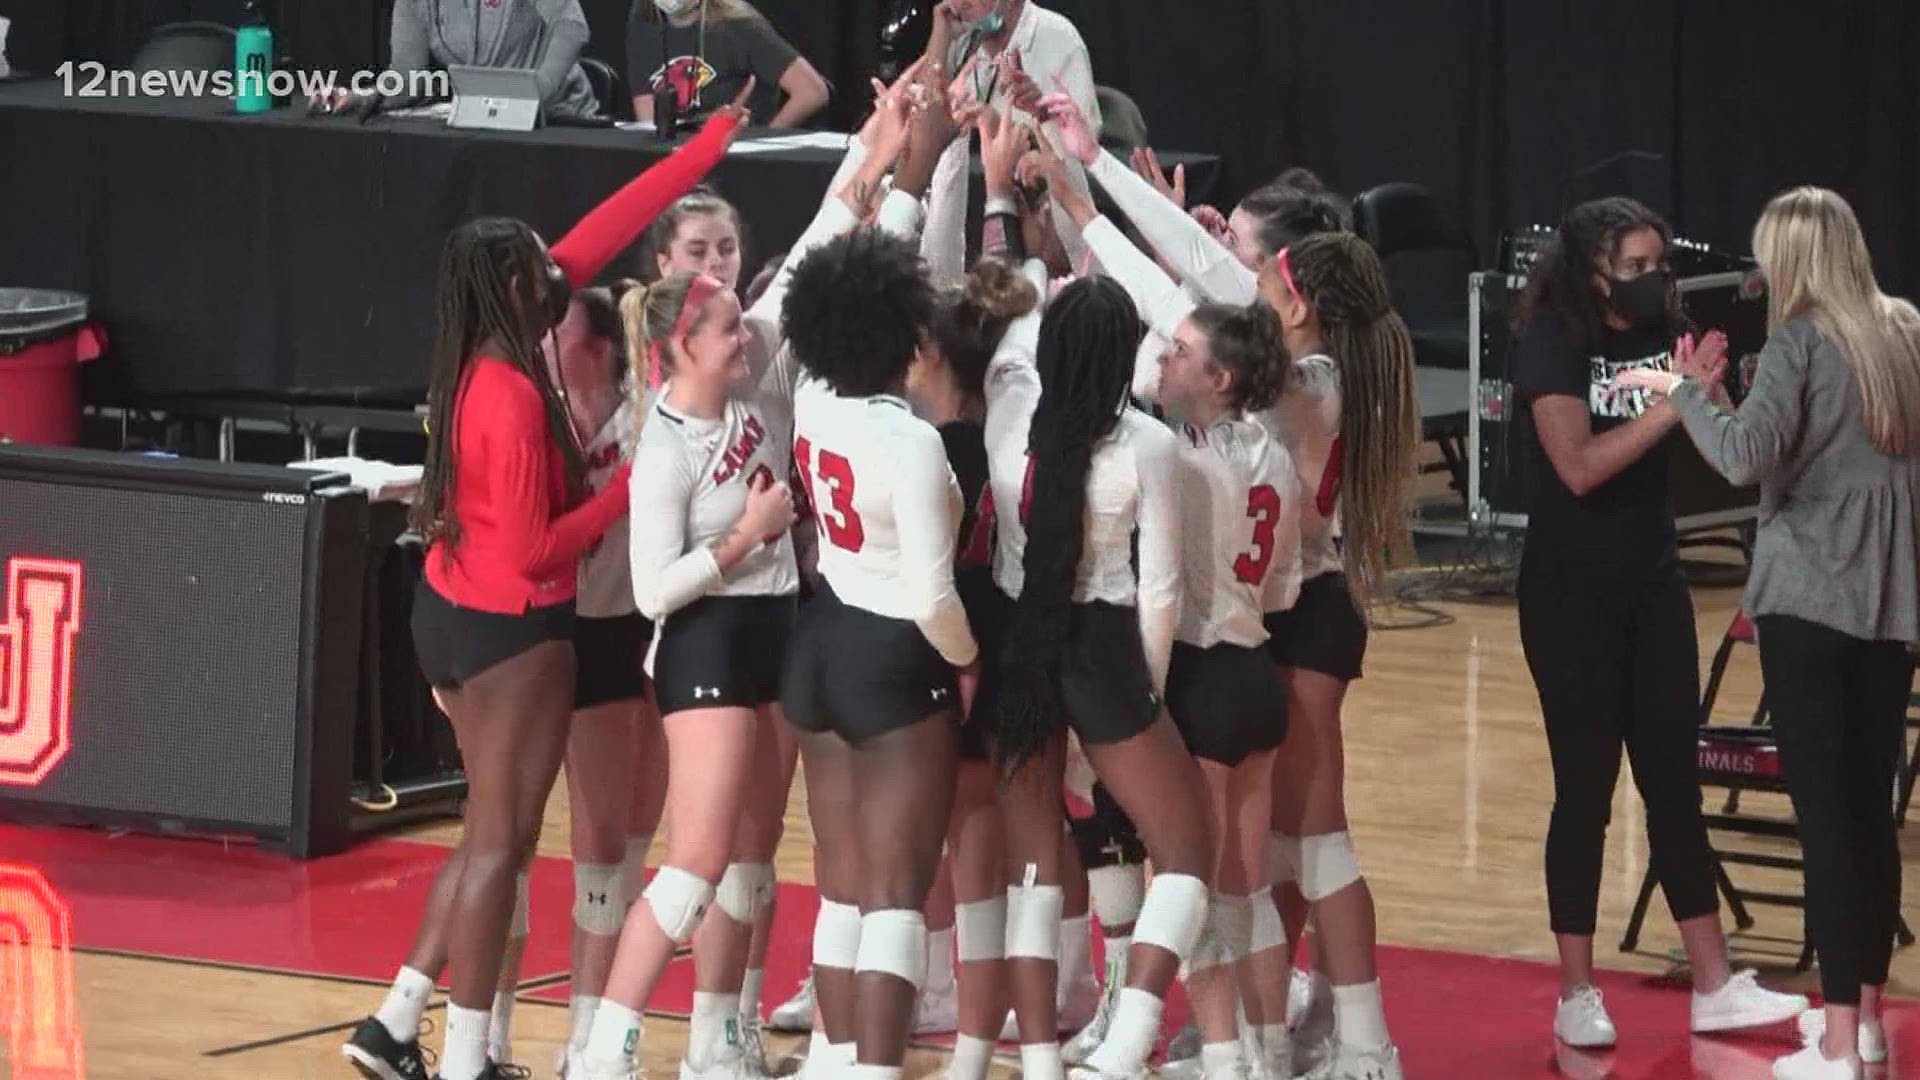 Lamar volleyball is looking to turn things around after winning one game last season